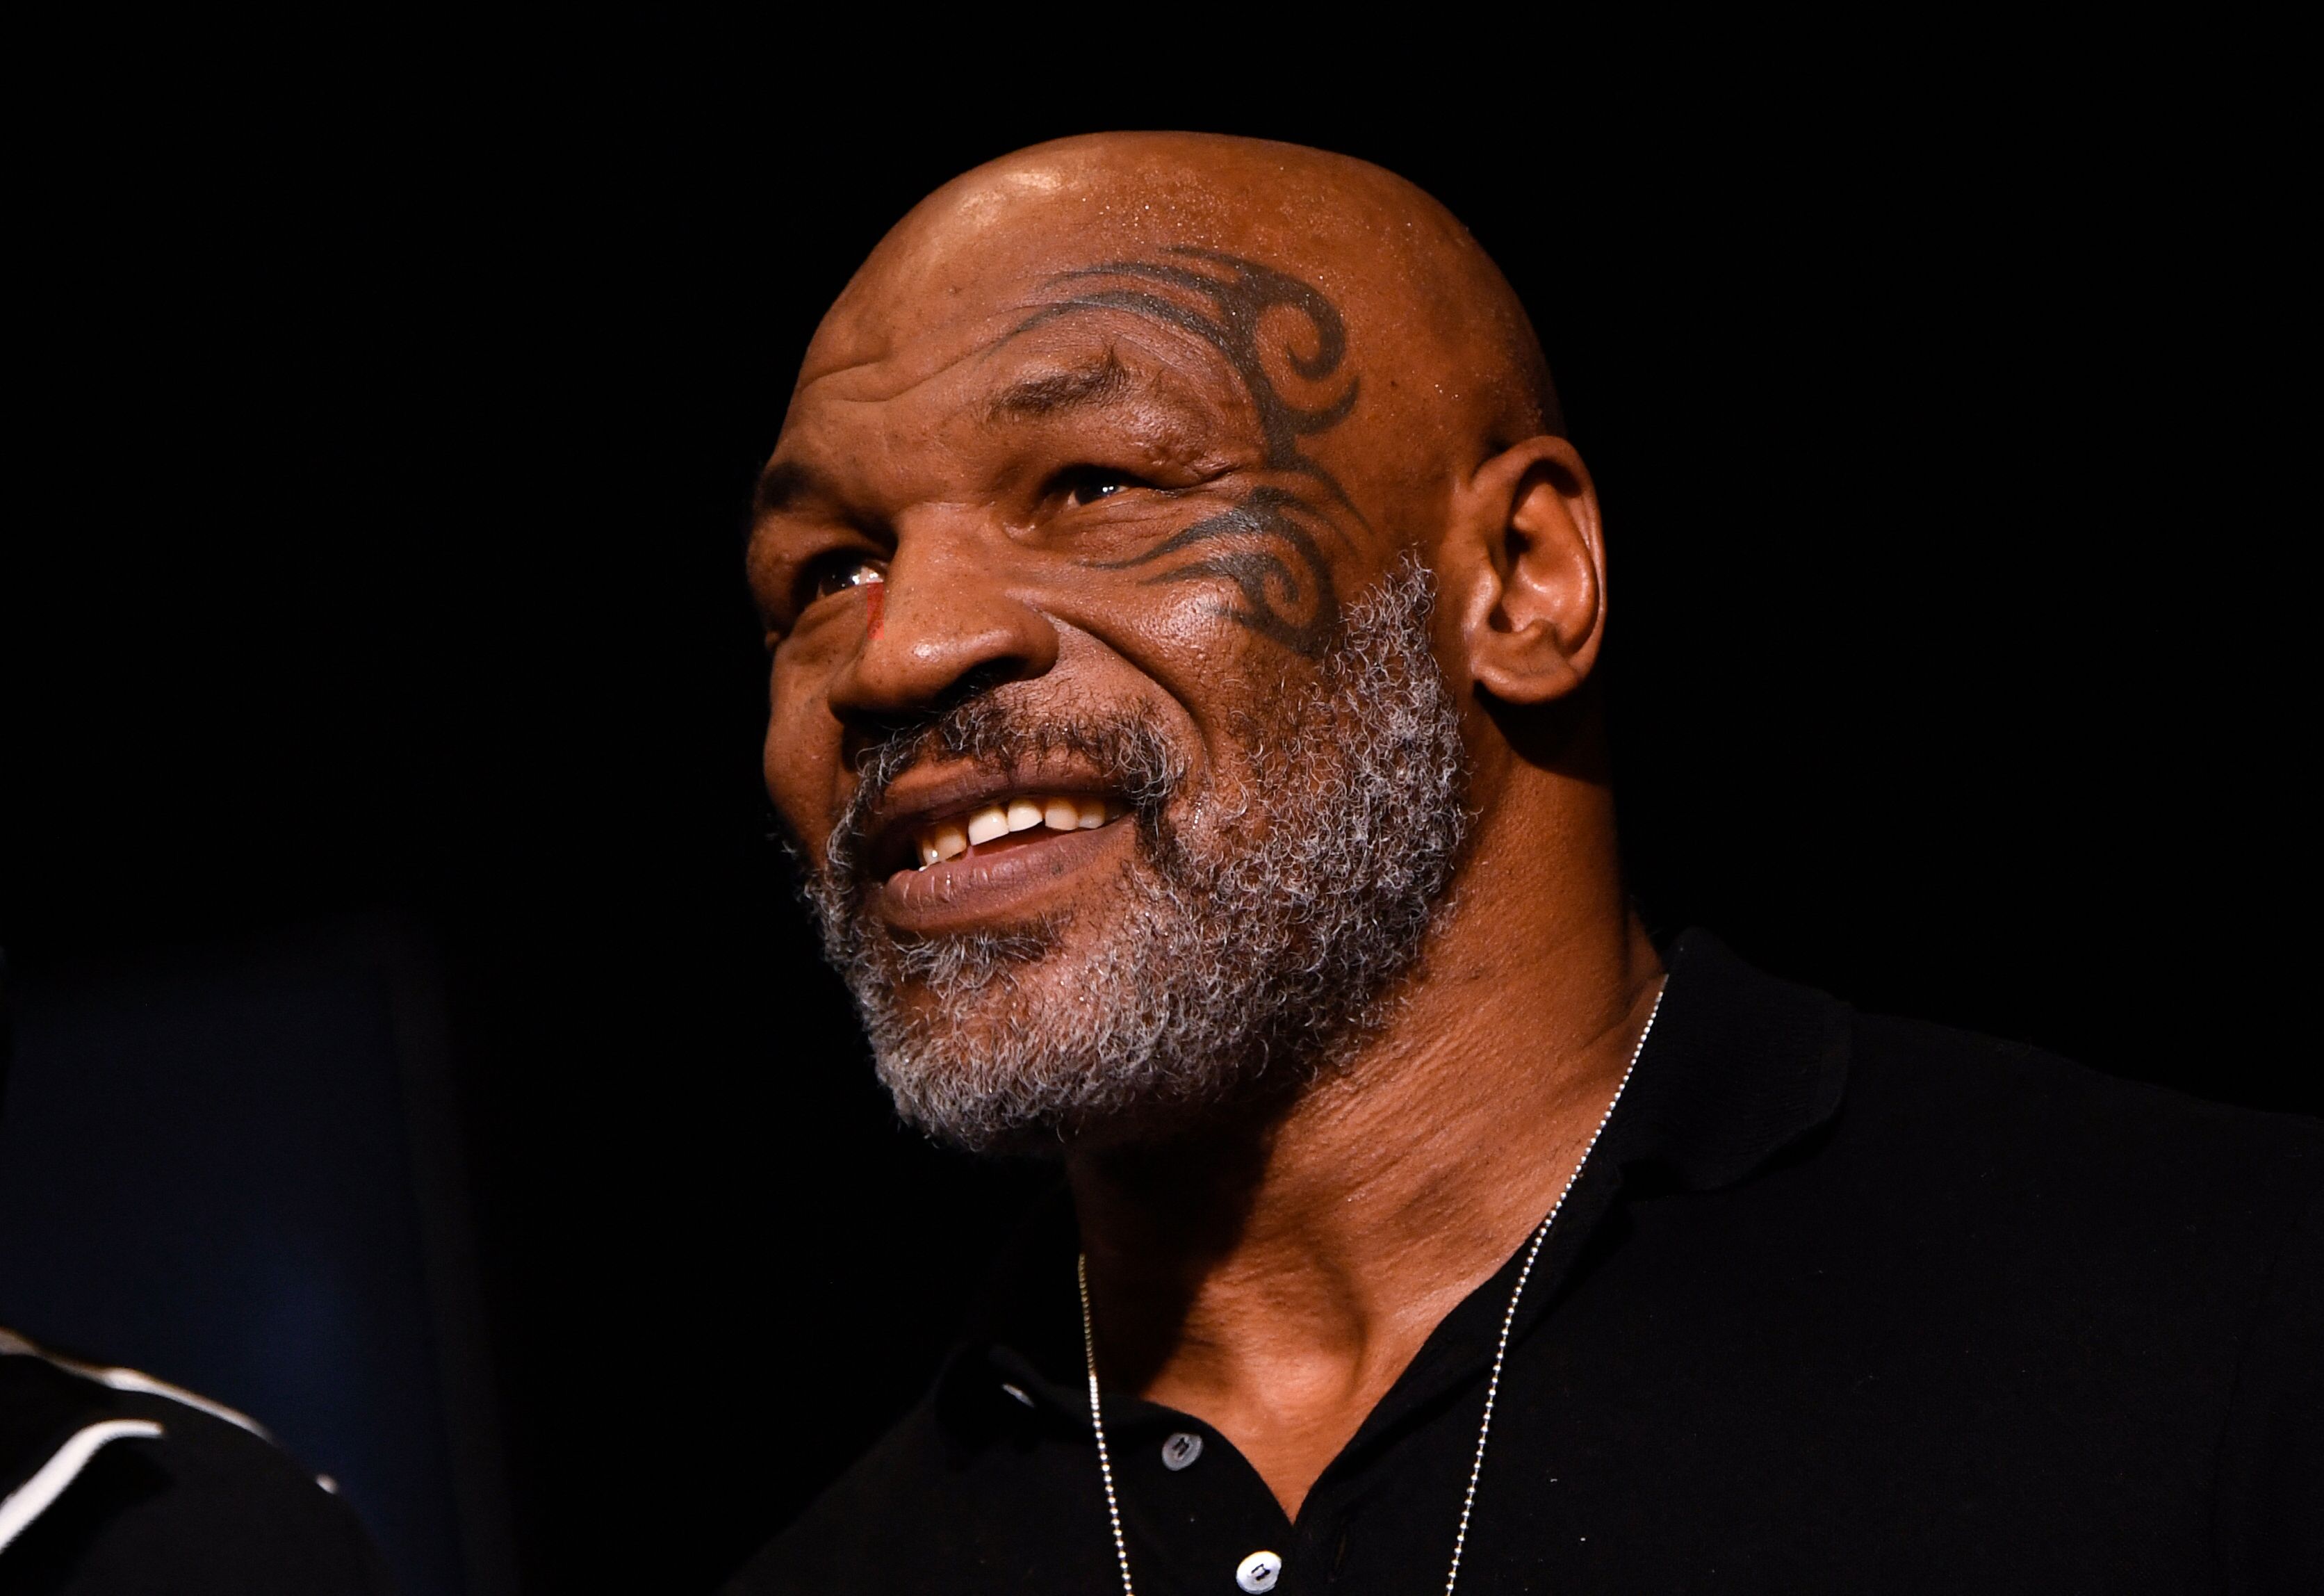 Mike Tyson on What He Sees When He Looks in the Mirror: ‘I See a Little Boy That Tricked the World’